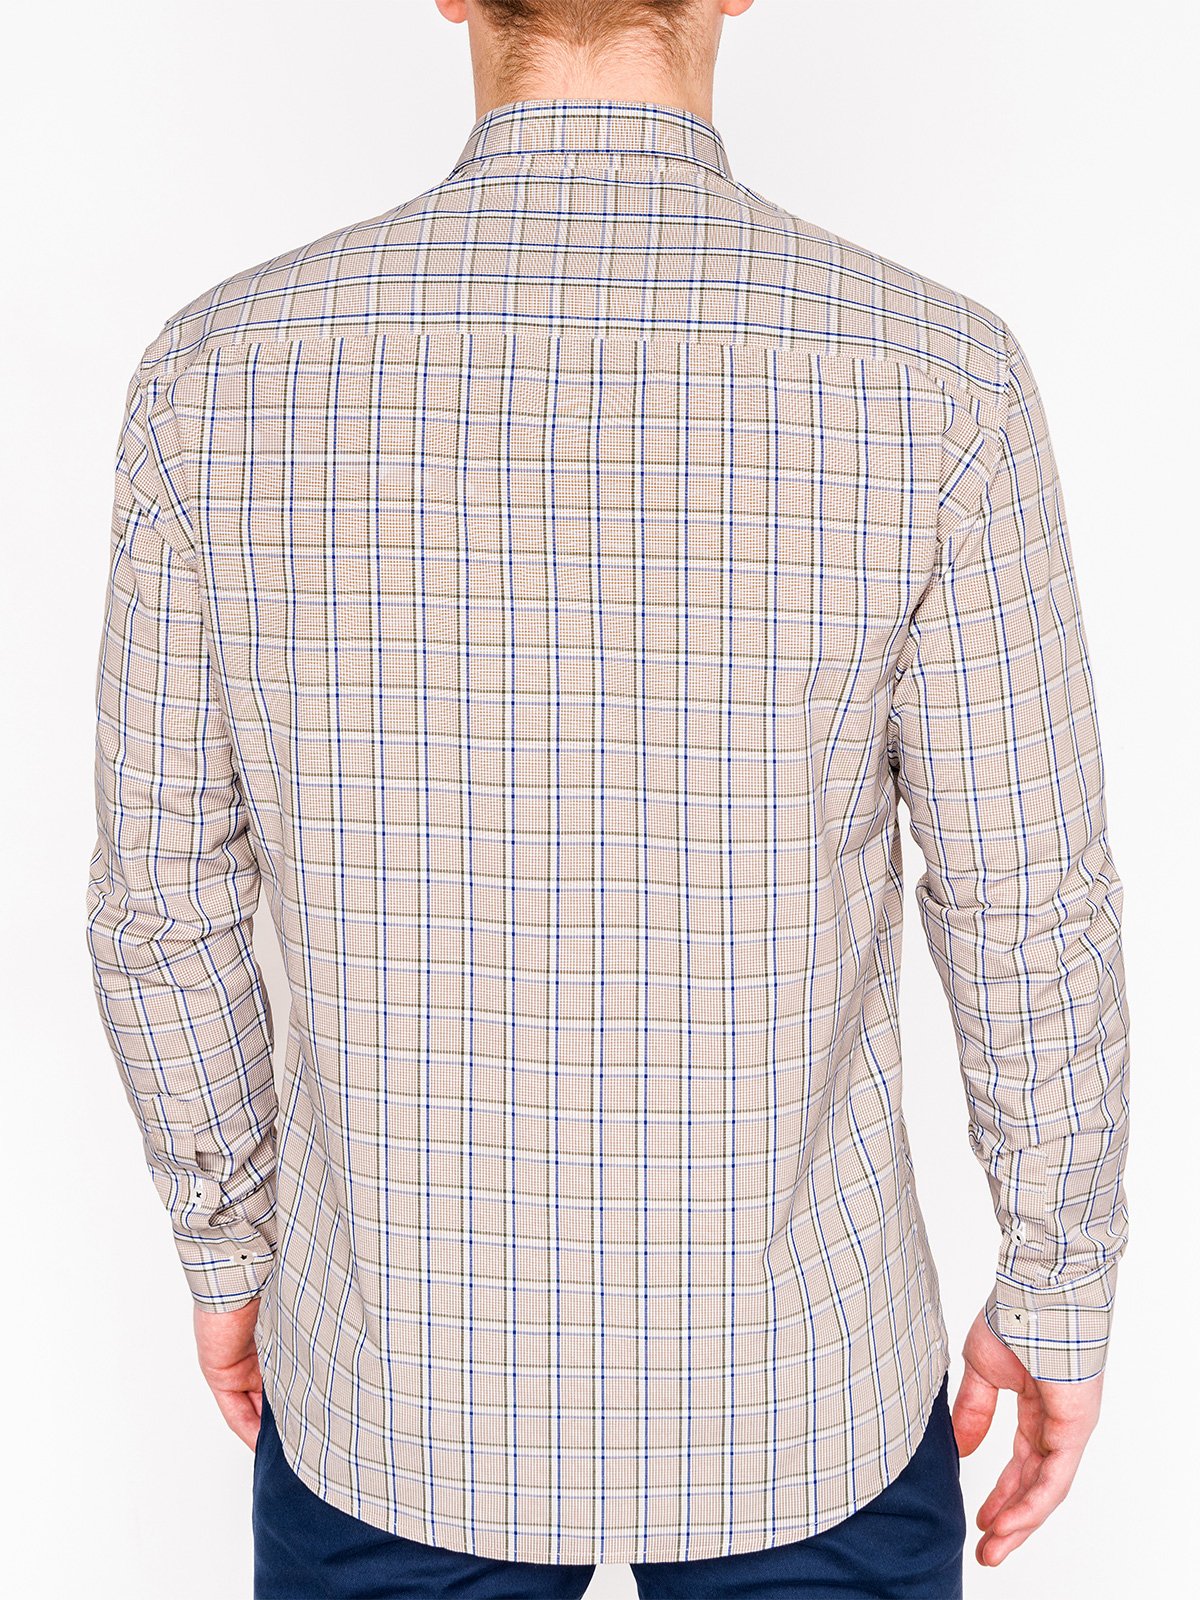 Men's check shirt with long sleeves K447 - beige | MODONE wholesale ...